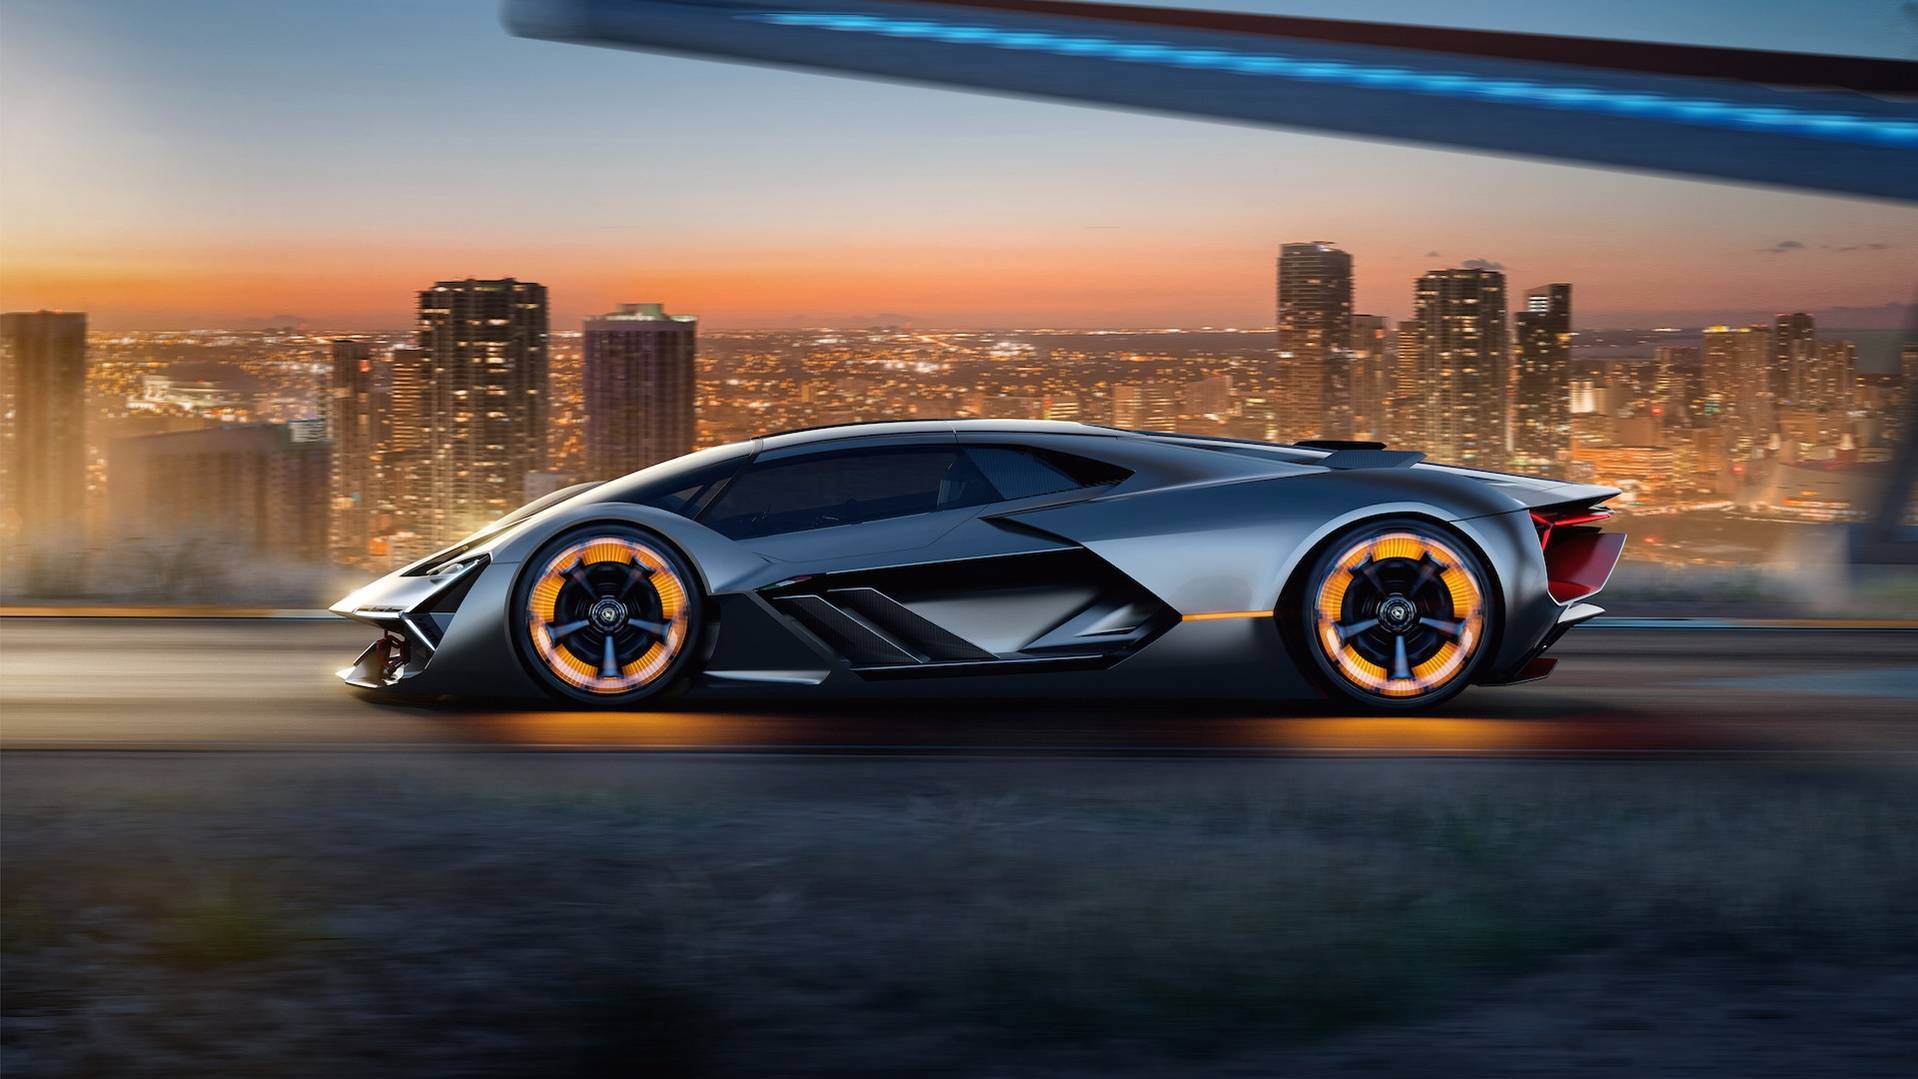 Lamborghini's reportedly building a $3M hypercar with hybrid